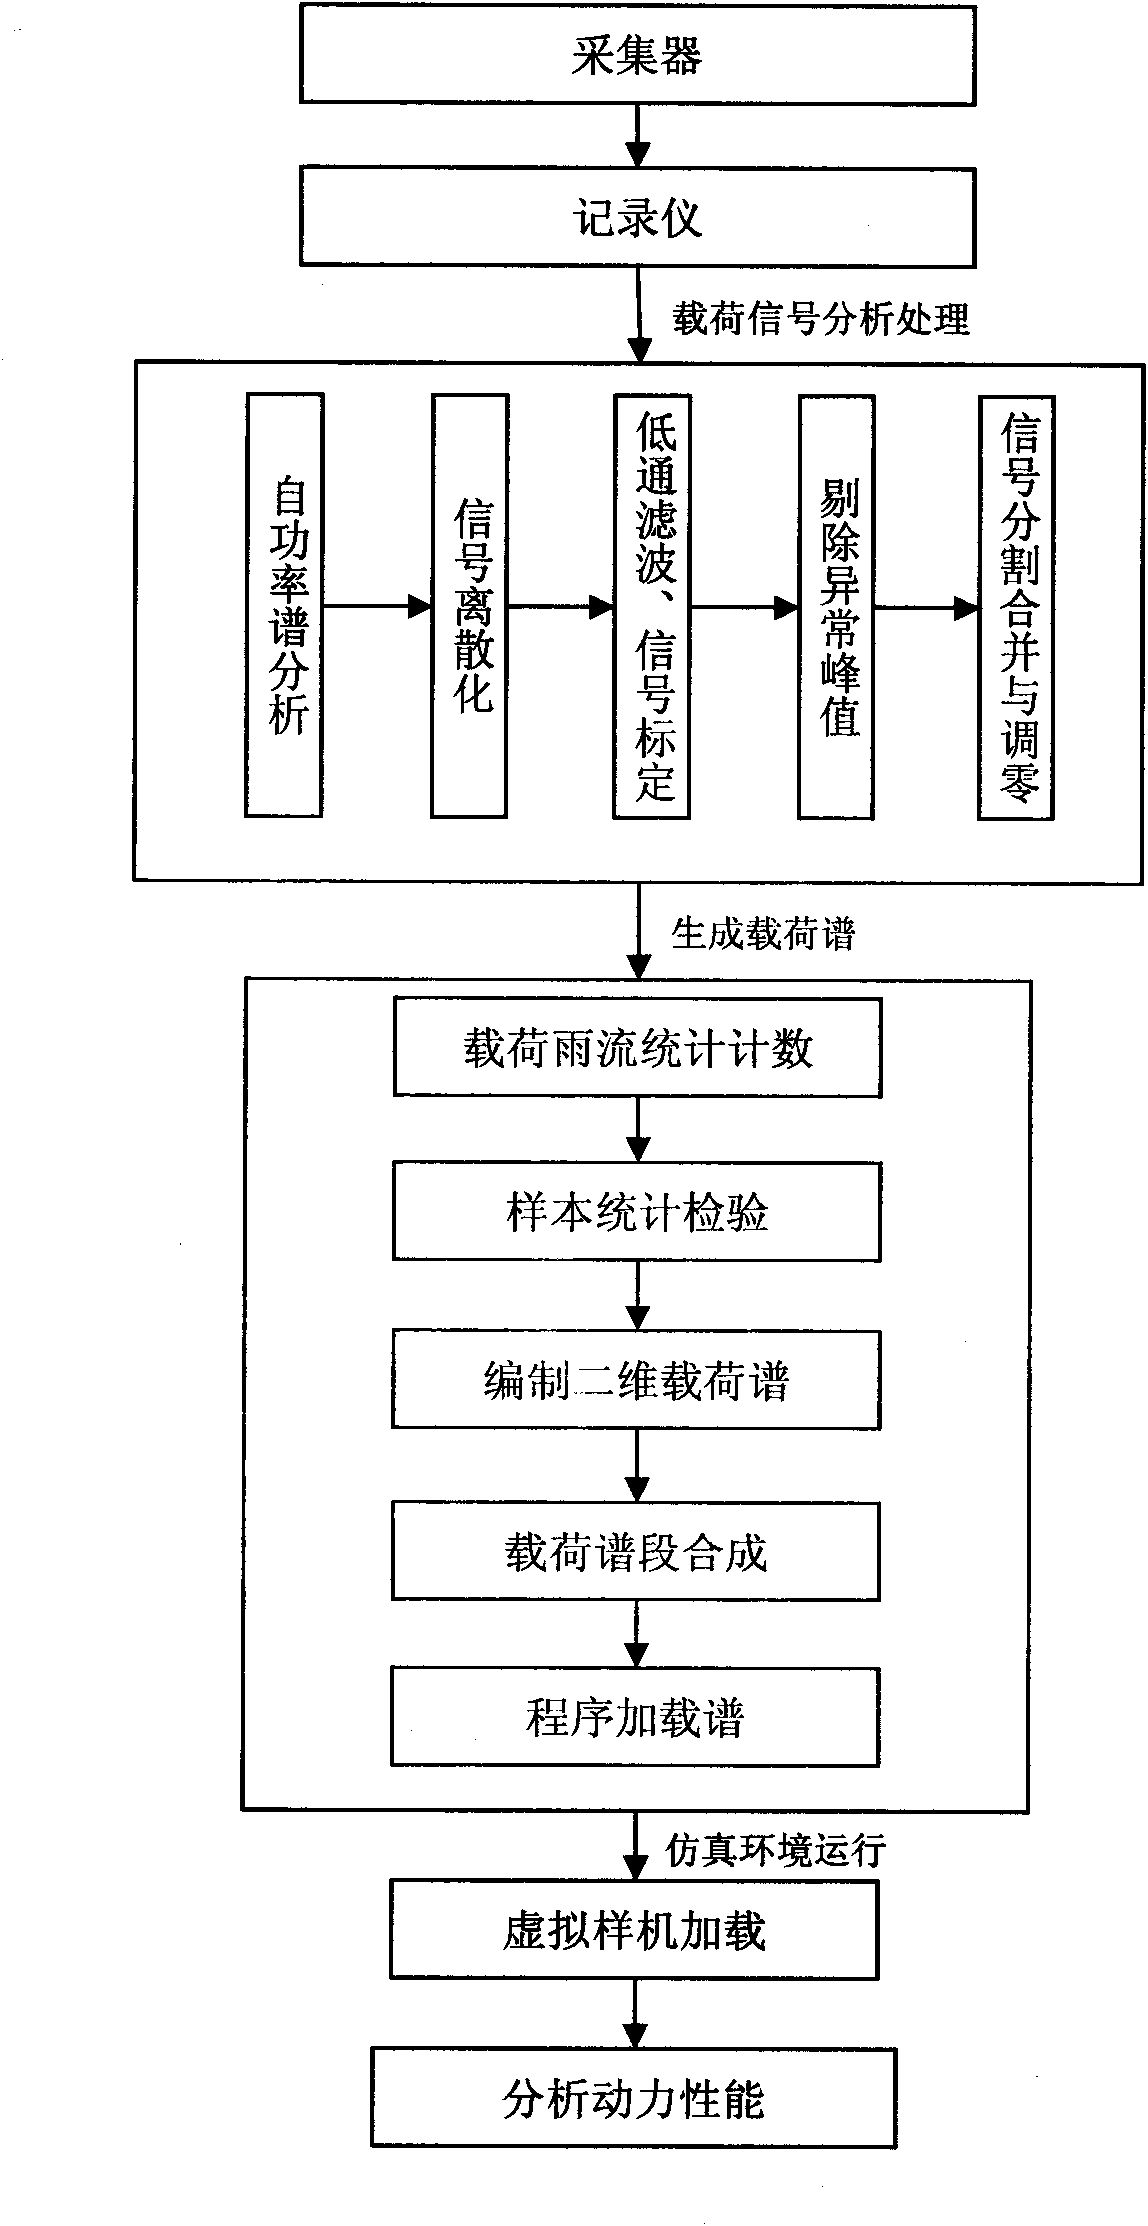 Transmission system load signal testing, analyzing and processing method of wheel-type loader